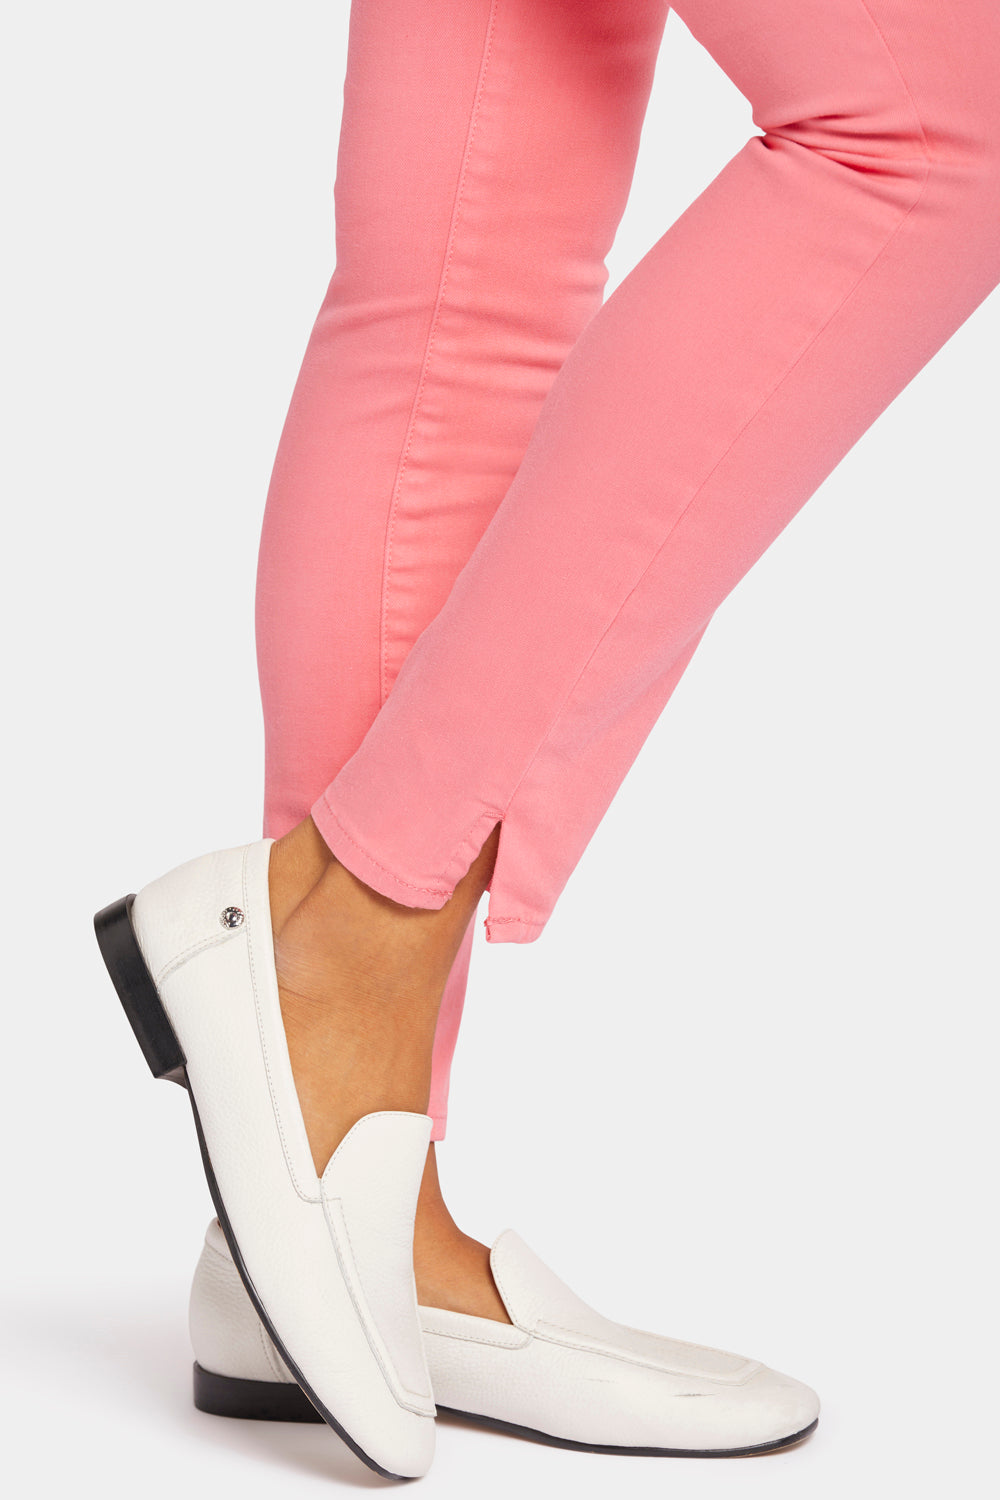 NYDJ Ami Skinny Jeans With High Rise And Side Slits - Pink Punch